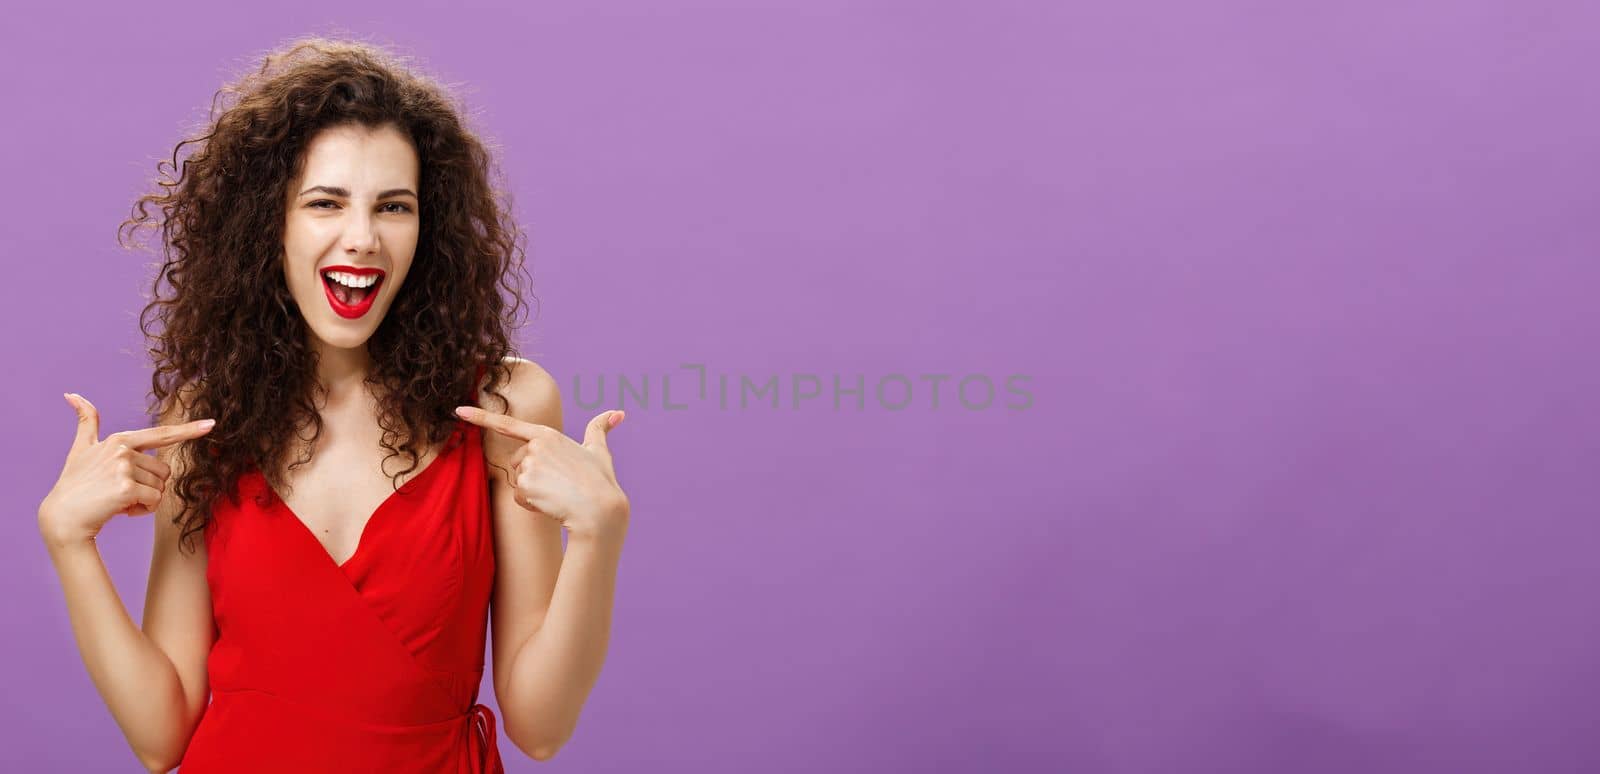 Woman celebrating successful sign of deal, pleased and satisfied bragging about own achievements pointing at herself smiling joyfully with triumph standing in evening red dress over purple background. Copy space